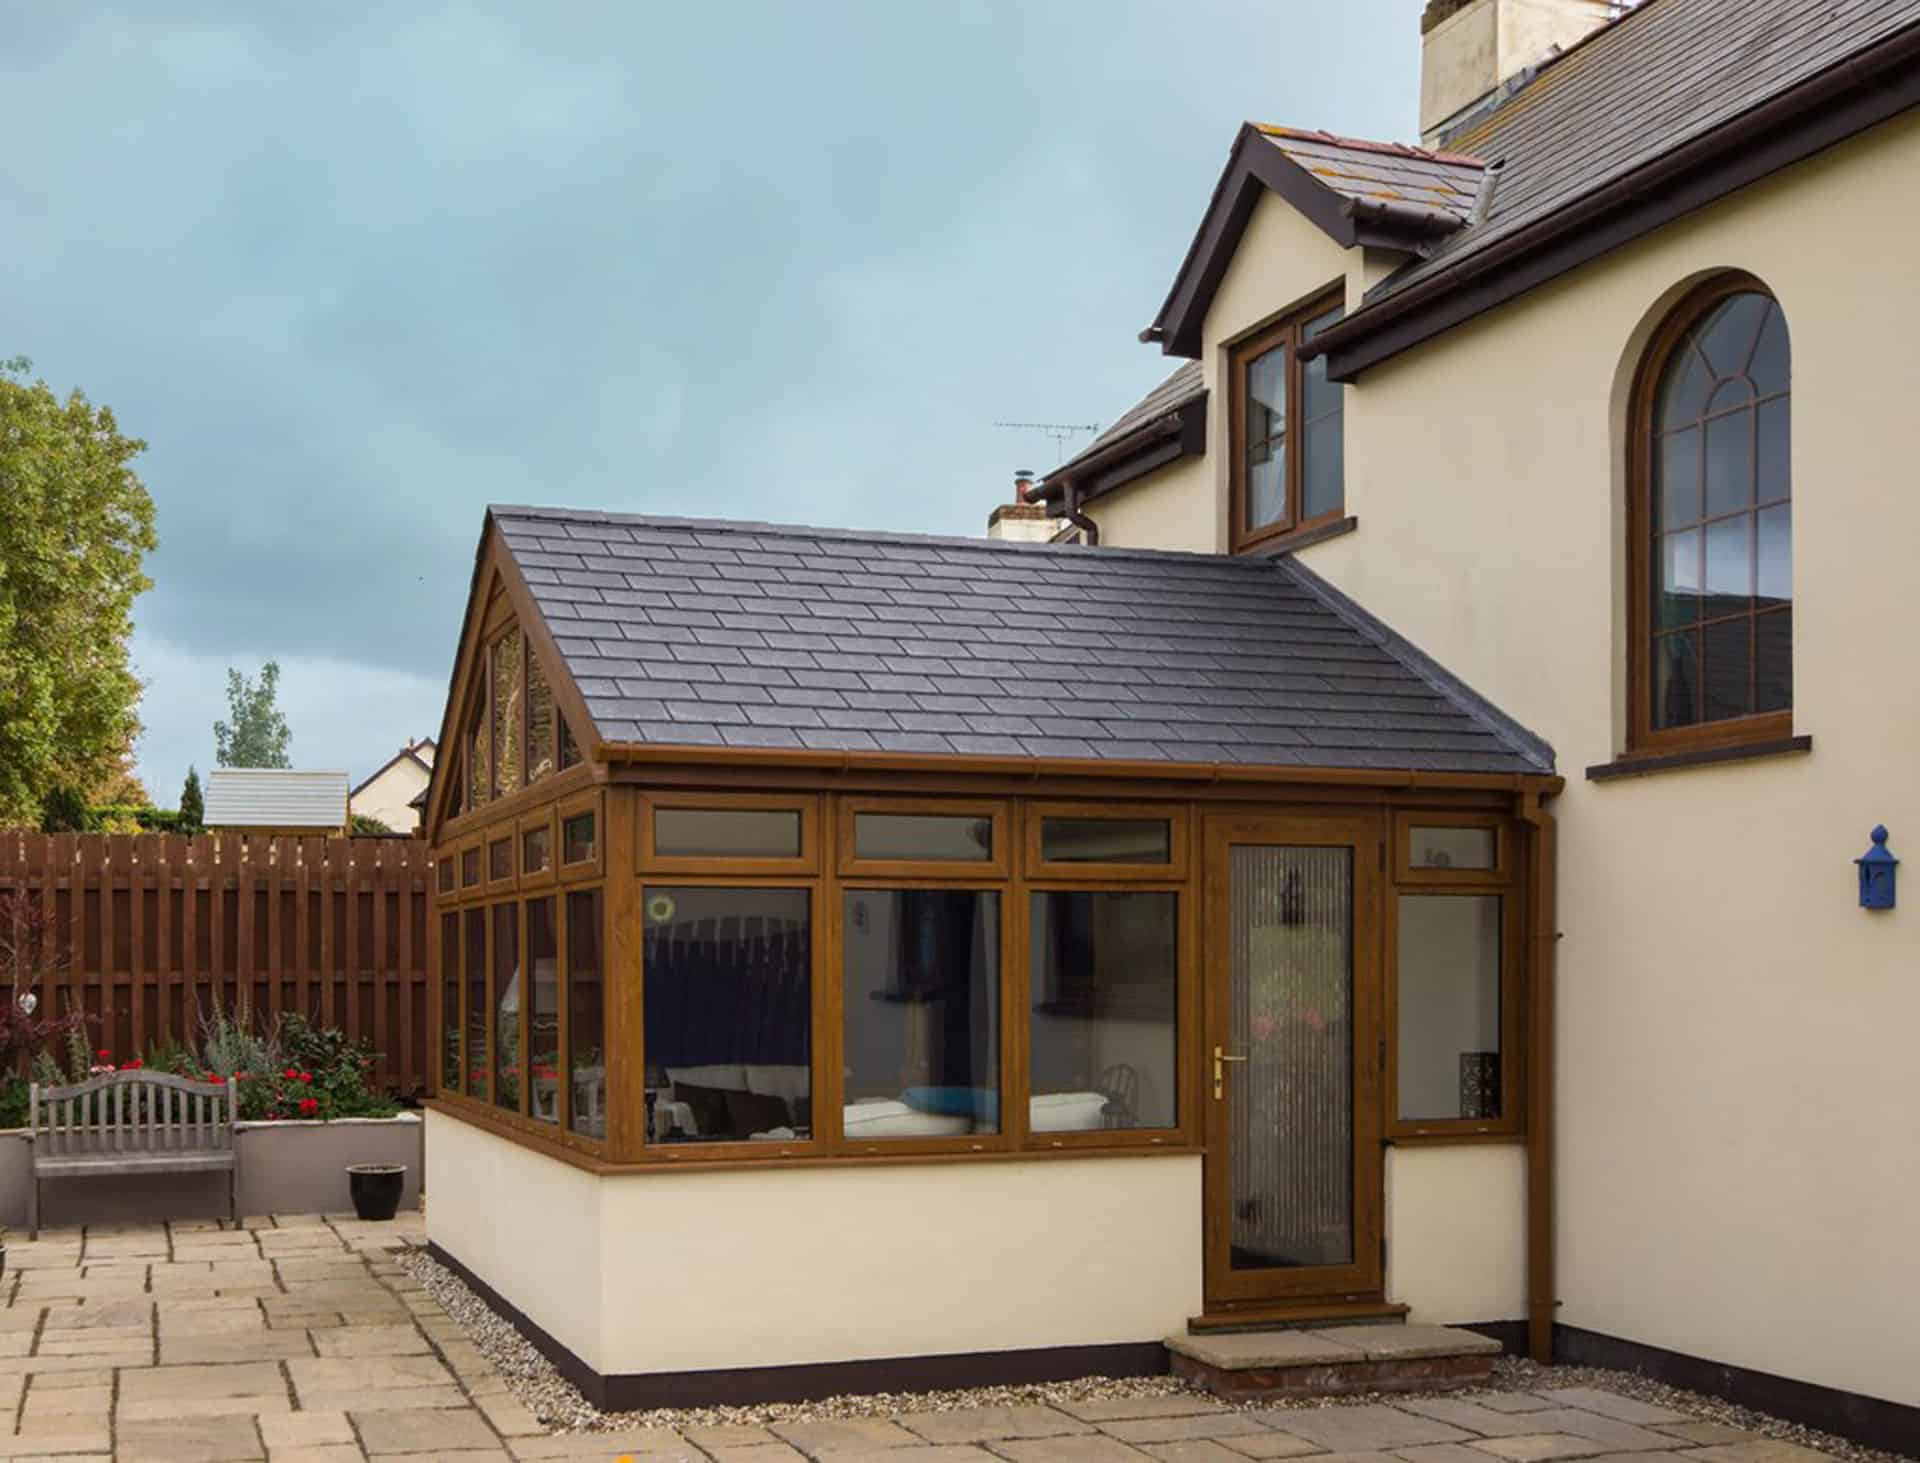 Conservatory roof types for tiled roof replacement